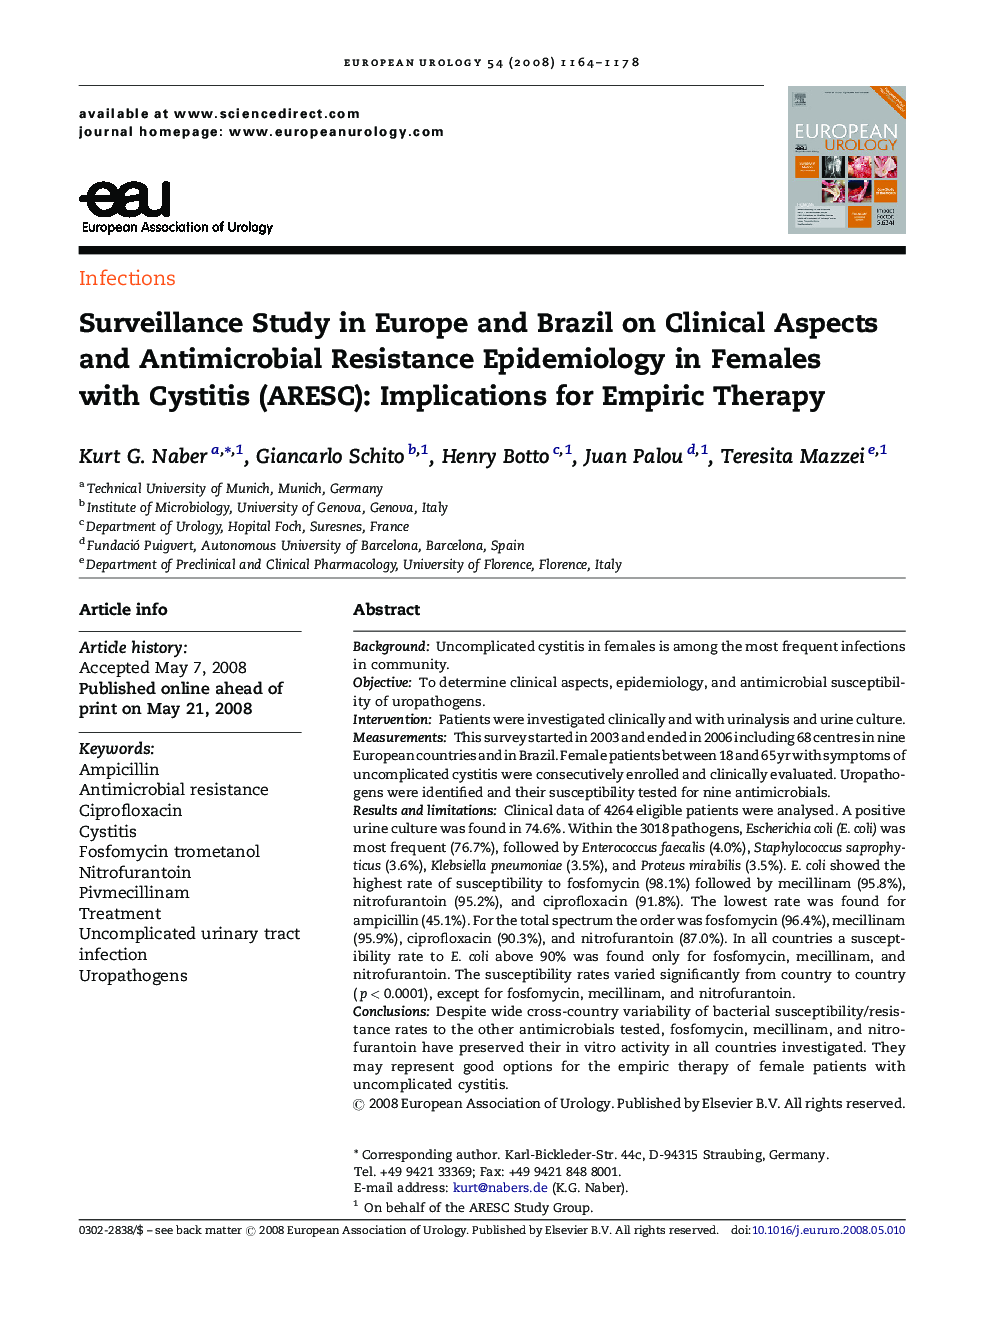 Surveillance Study in Europe and Brazil on Clinical Aspects and Antimicrobial Resistance Epidemiology in Females with Cystitis (ARESC): Implications for Empiric Therapy